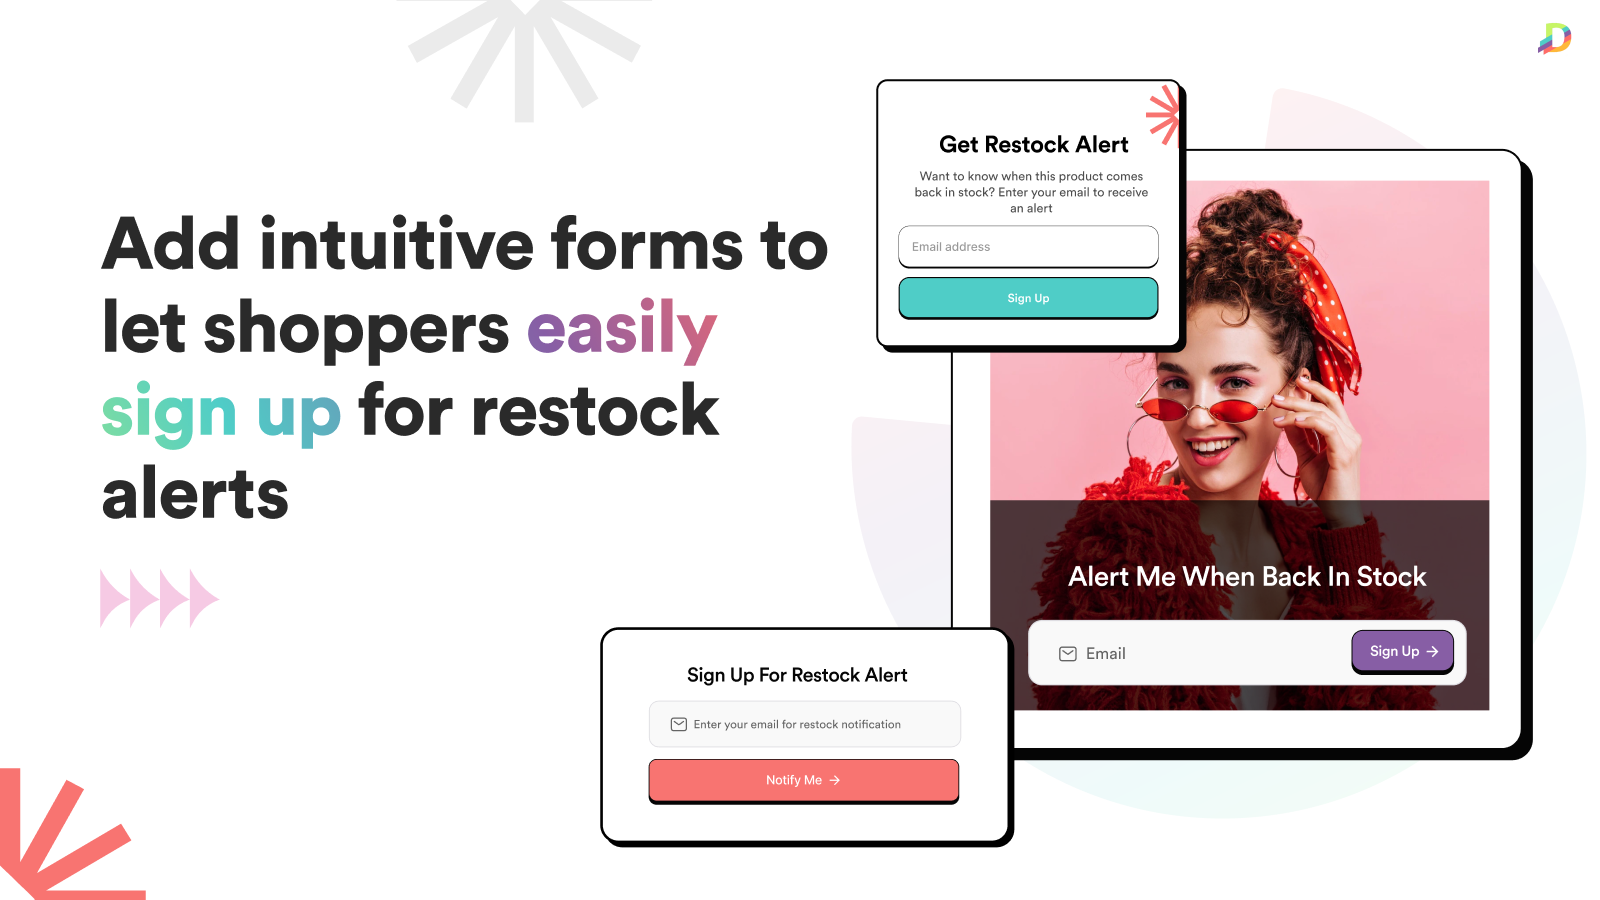 Alert Me Restock Alerts works natively in your Shopify Dashboard